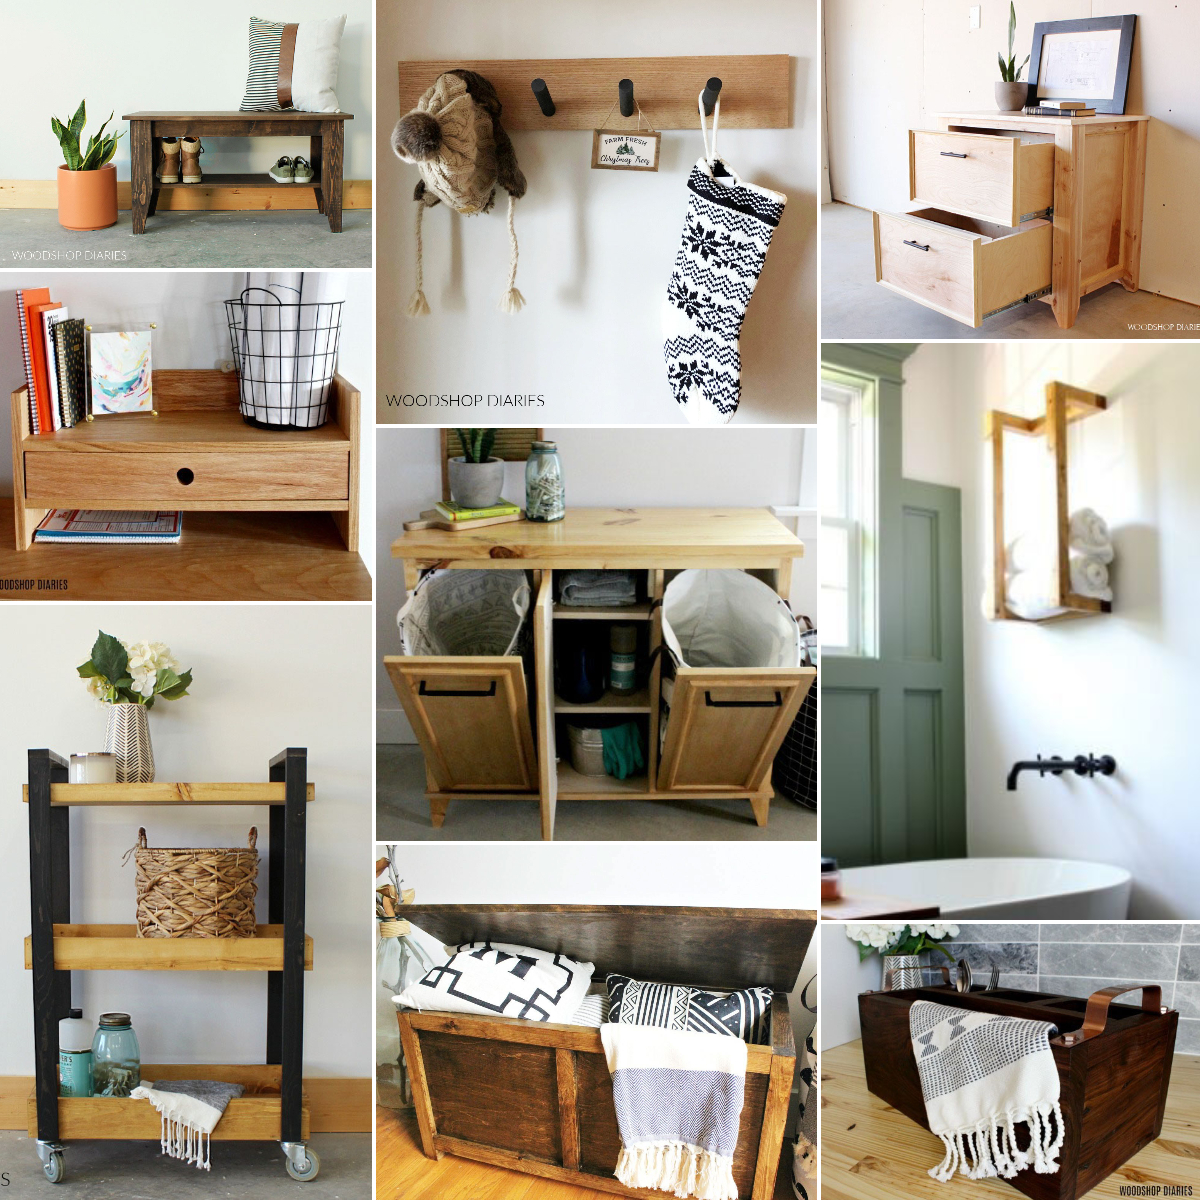 25 Diy Storage Projects Made From Wood